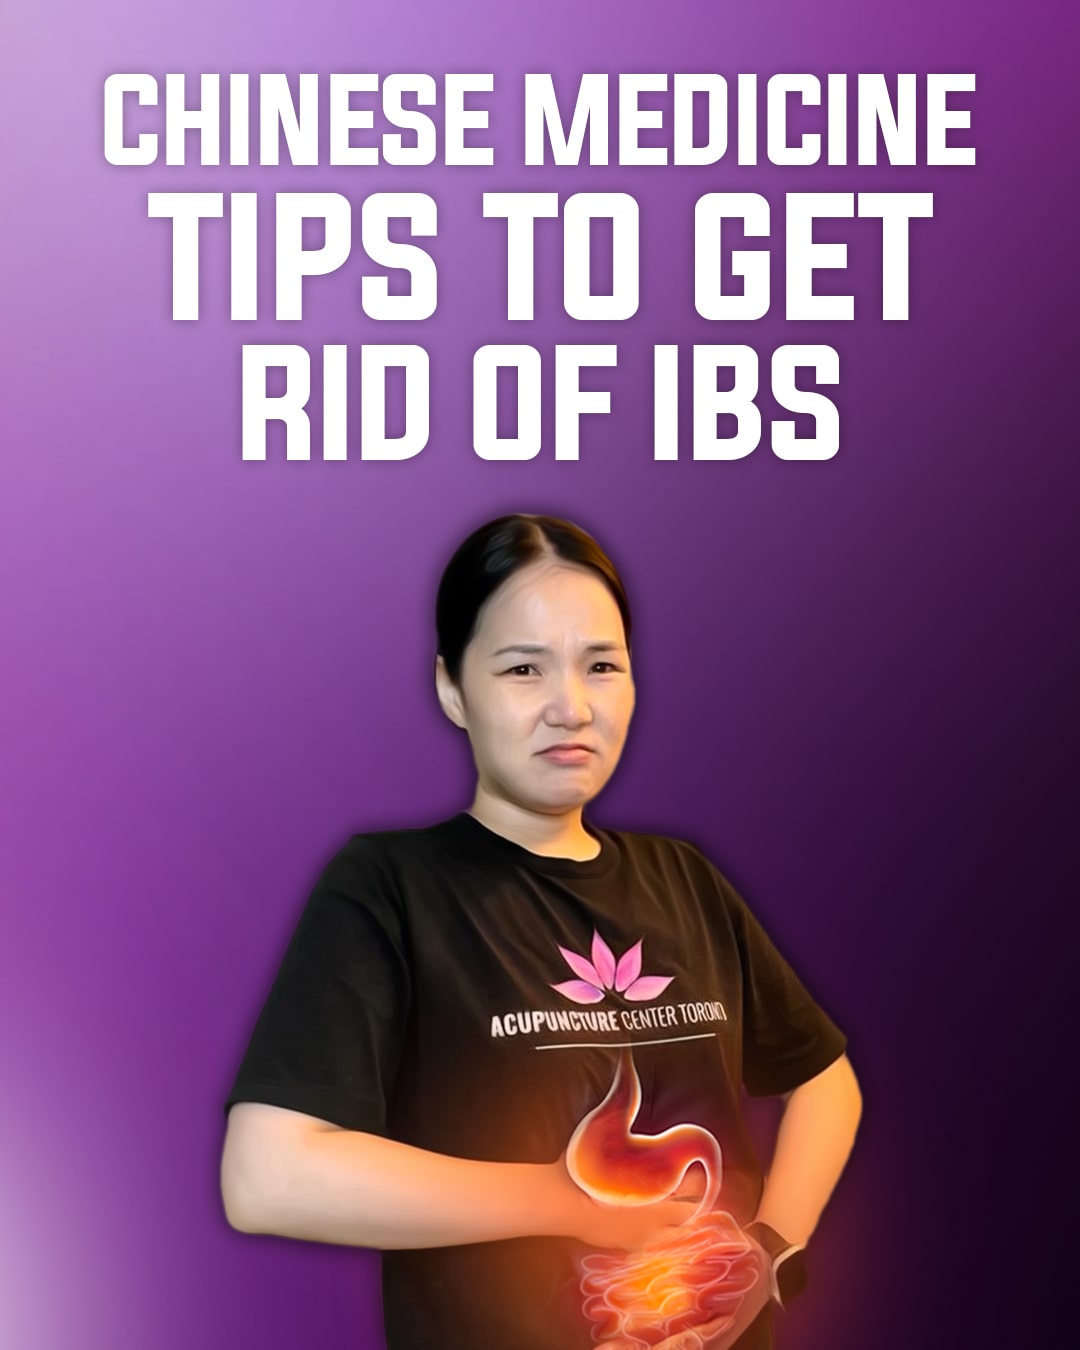 Chinese Medicine Tips by an Acupuncturist for IBS